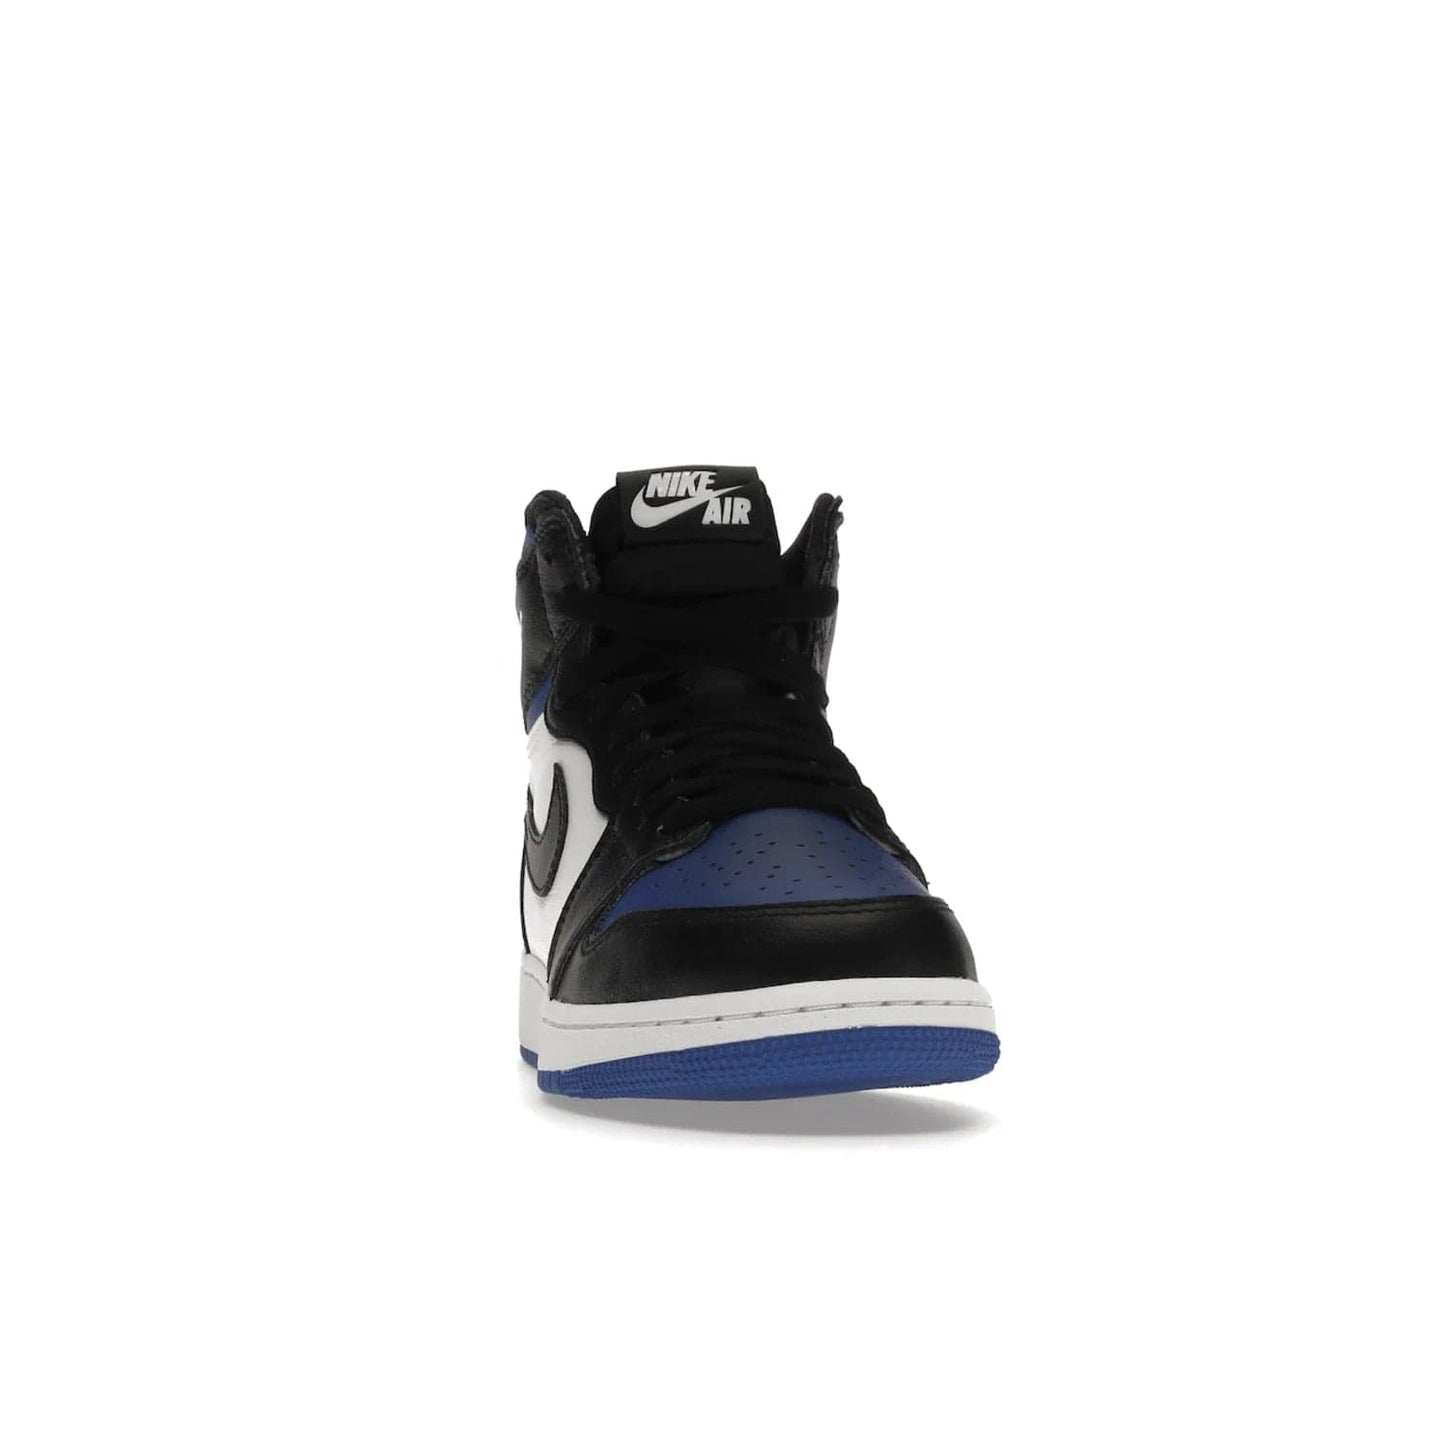 Jordan 1 Retro High Royal Toe (GS) - Image 9 - Only at www.BallersClubKickz.com - Take your sneaker wardrobe to the next level with the Jordan 1 Retro High Royal Toe (GS). Combining classic design with a luxurious white and royal blue leather upper, a textured black Swoosh and a tapered outsole. Stand out with the Air Jordan Wings logo near the heel.